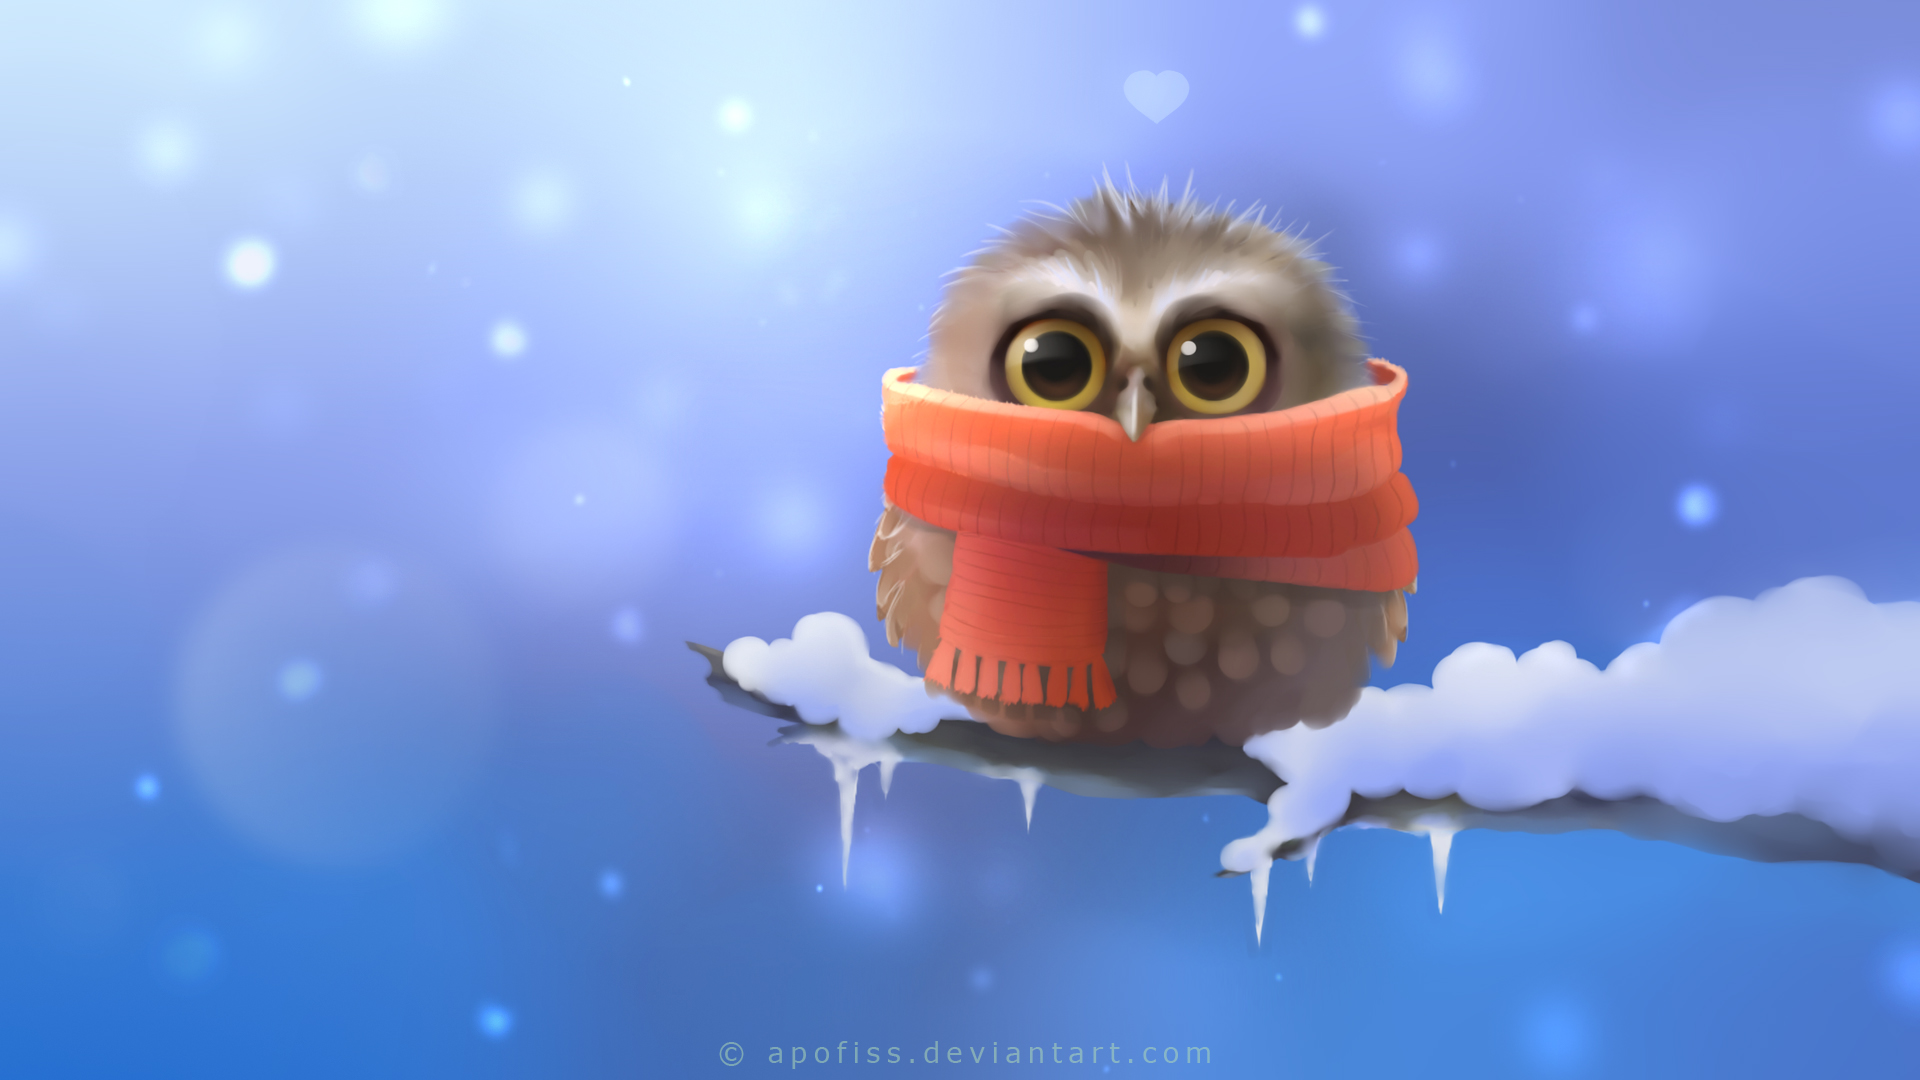 Cute Owl Wallpapers HD Wallpapers 1920x1080